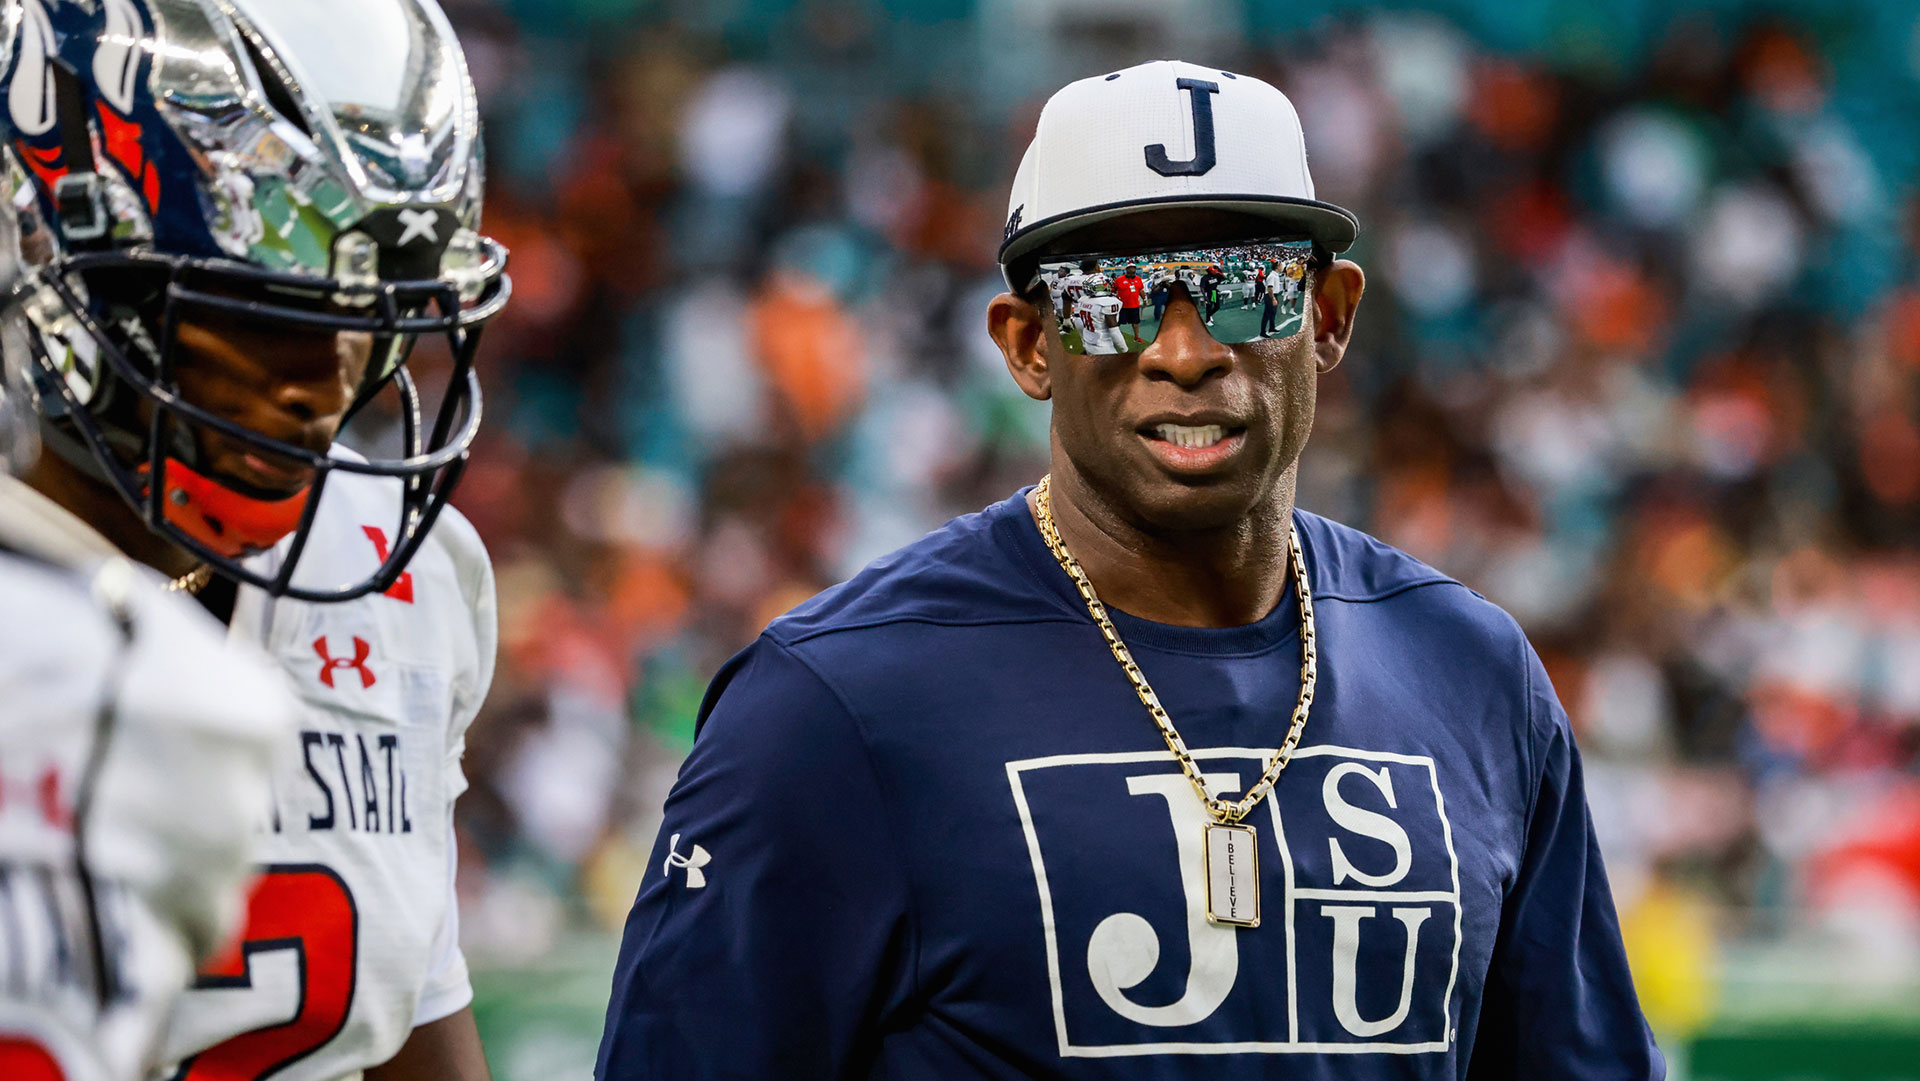 Coach Deion Prime Sanders talks with his son, Shedeur Sanders, Jackson State University Quarterback before the start of the second half of the game against Florida A&M University